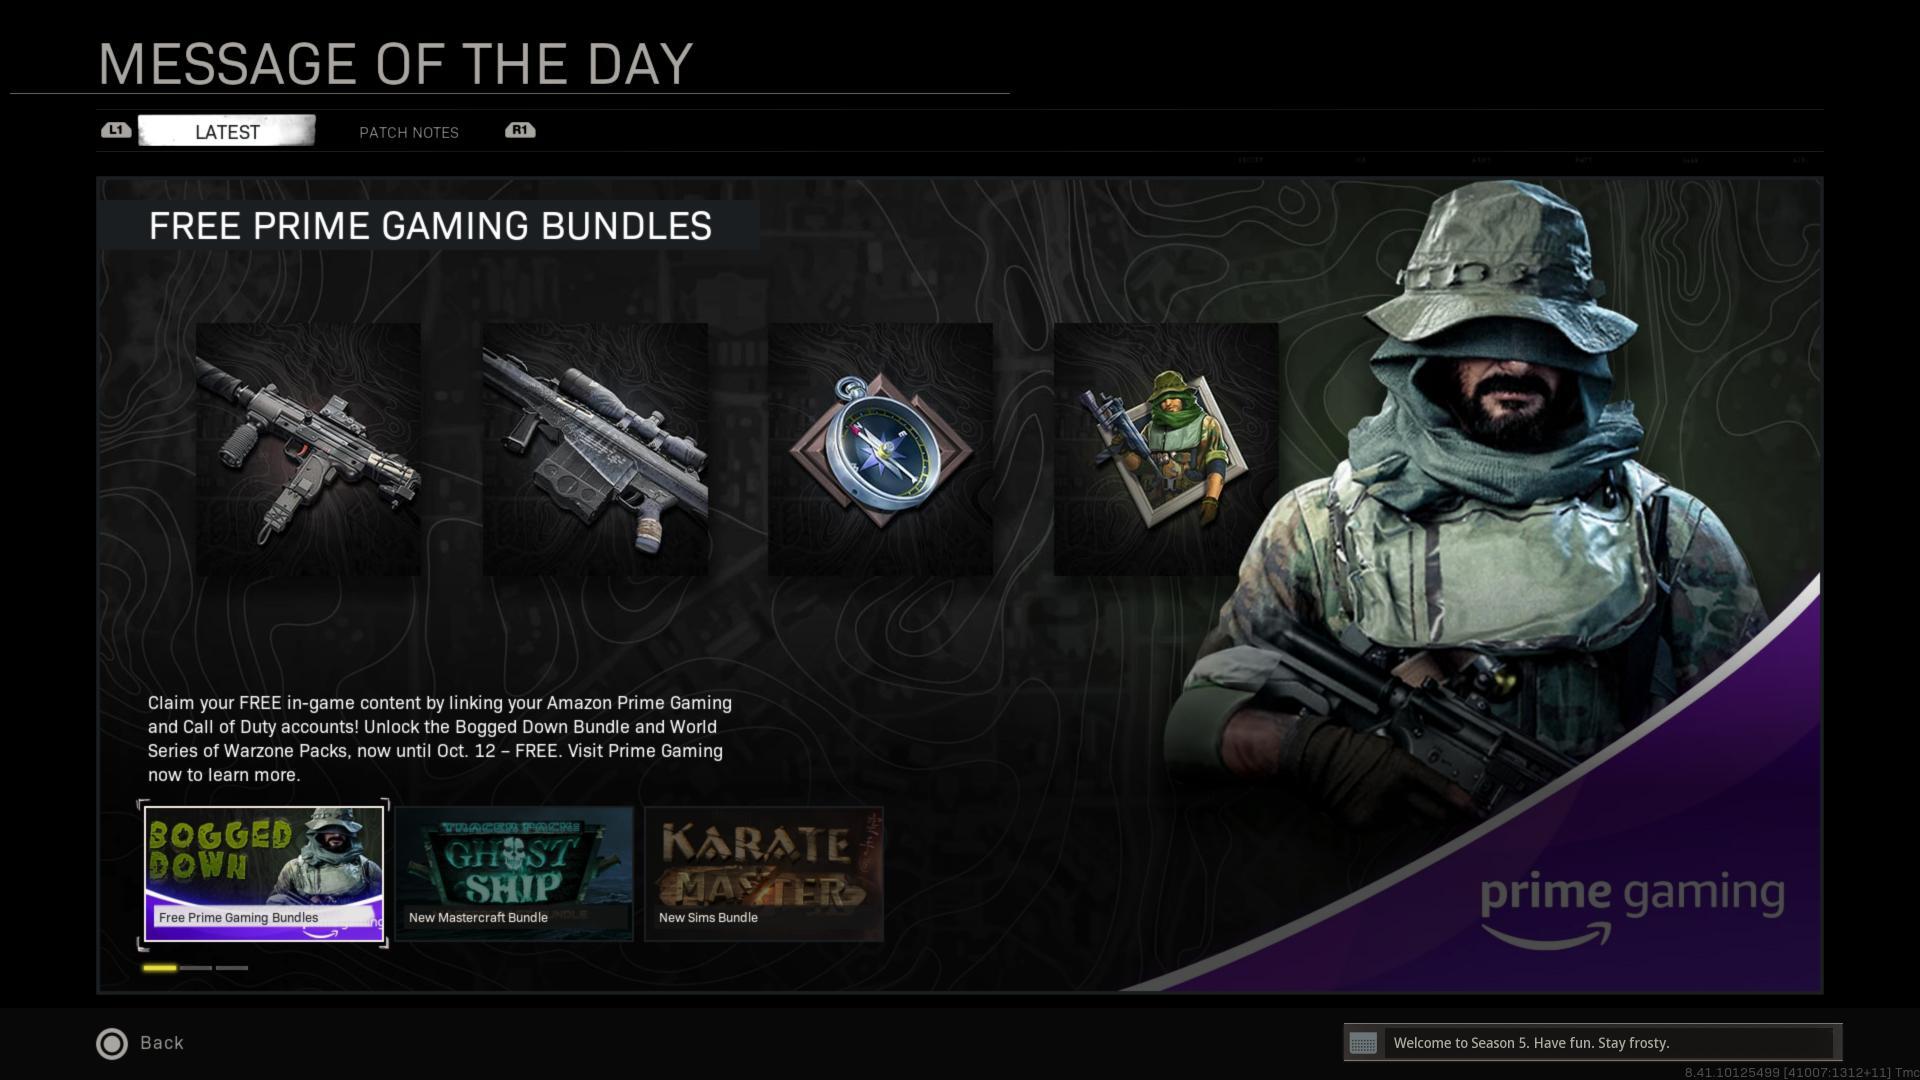 Call of Duty: How to Claim New Prime Gaming Loot - Scar Tissue Bundle &  Gator Done Bundle